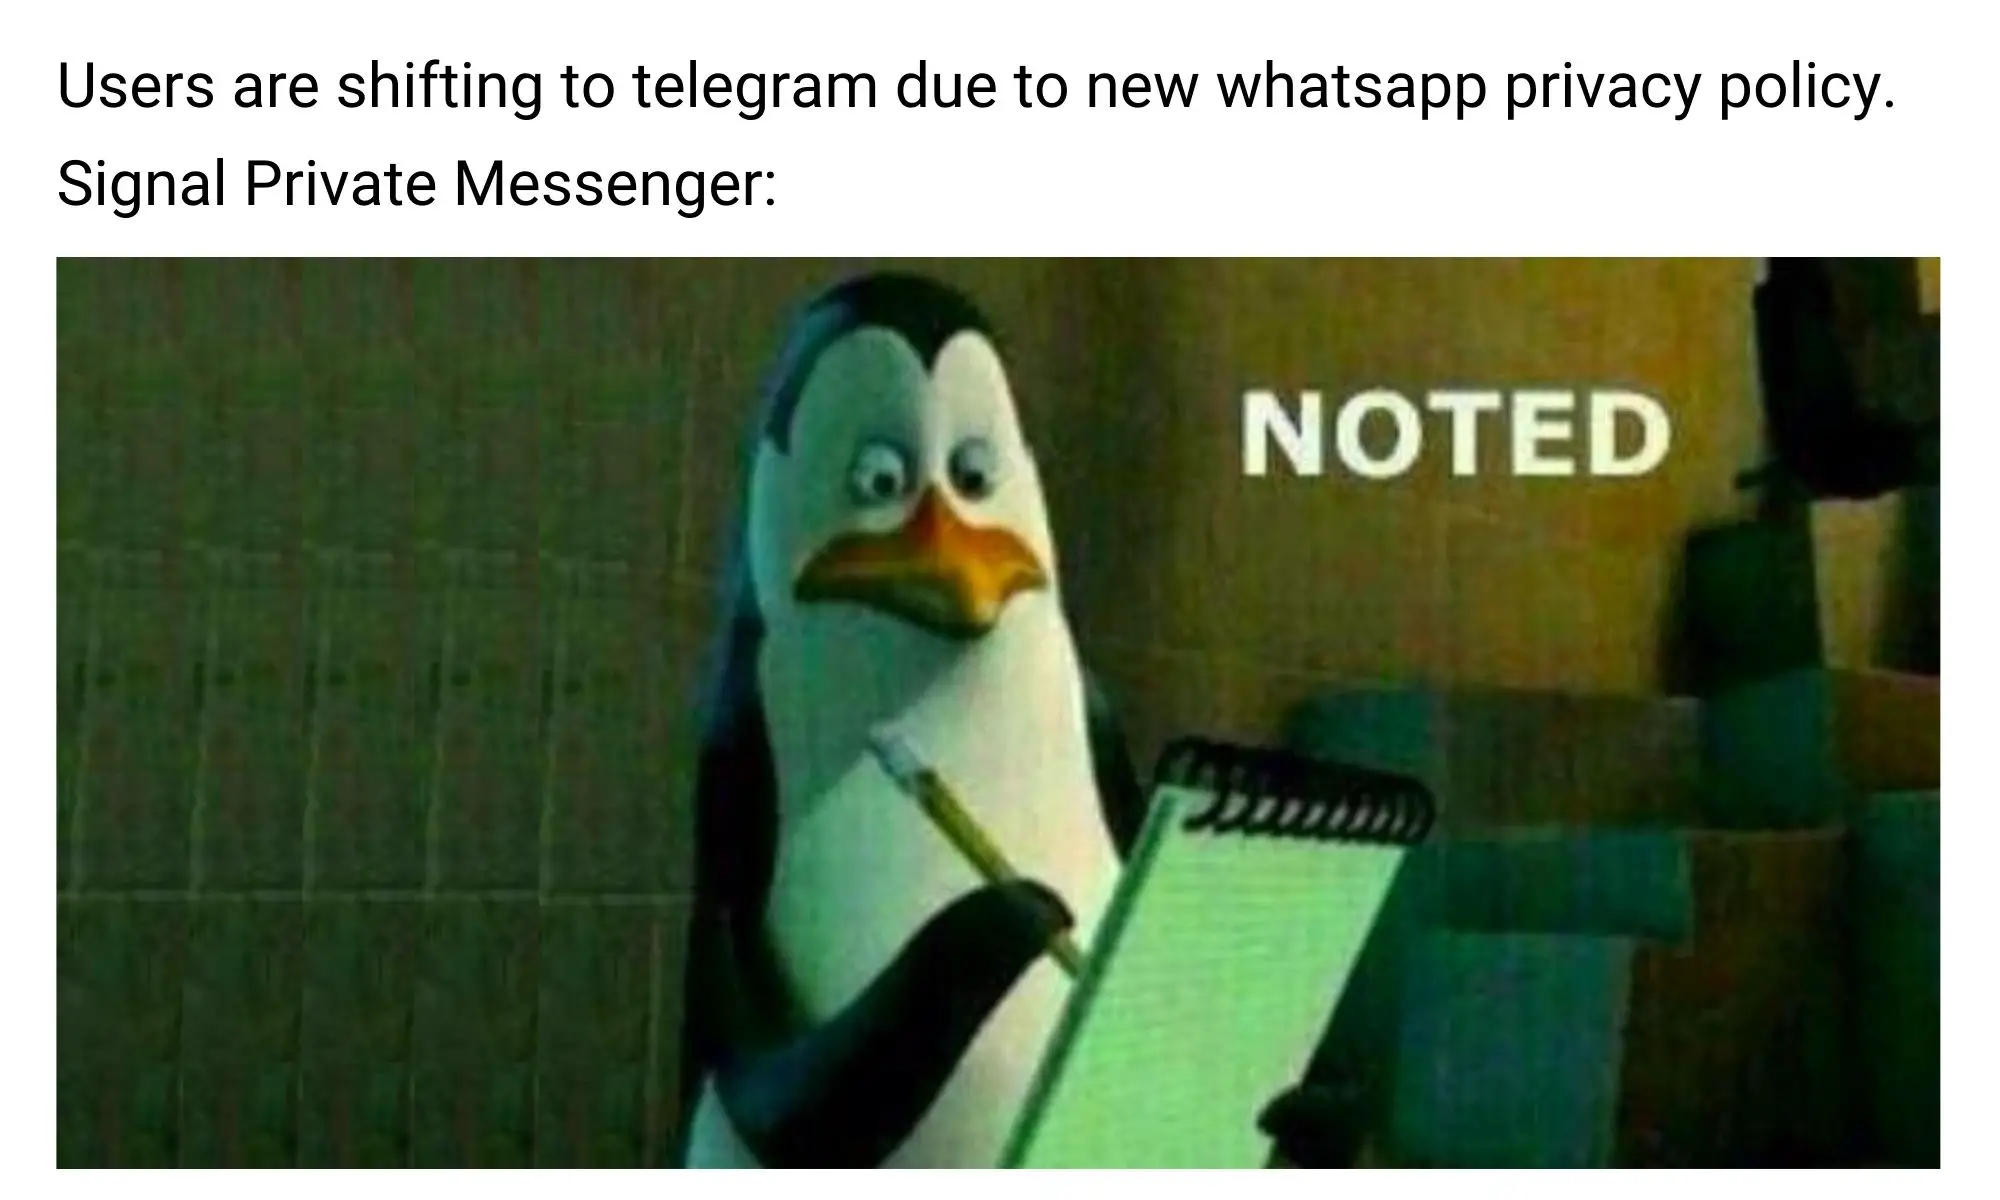 Noted Meme Ft. New Whatsapp Privacy Policy